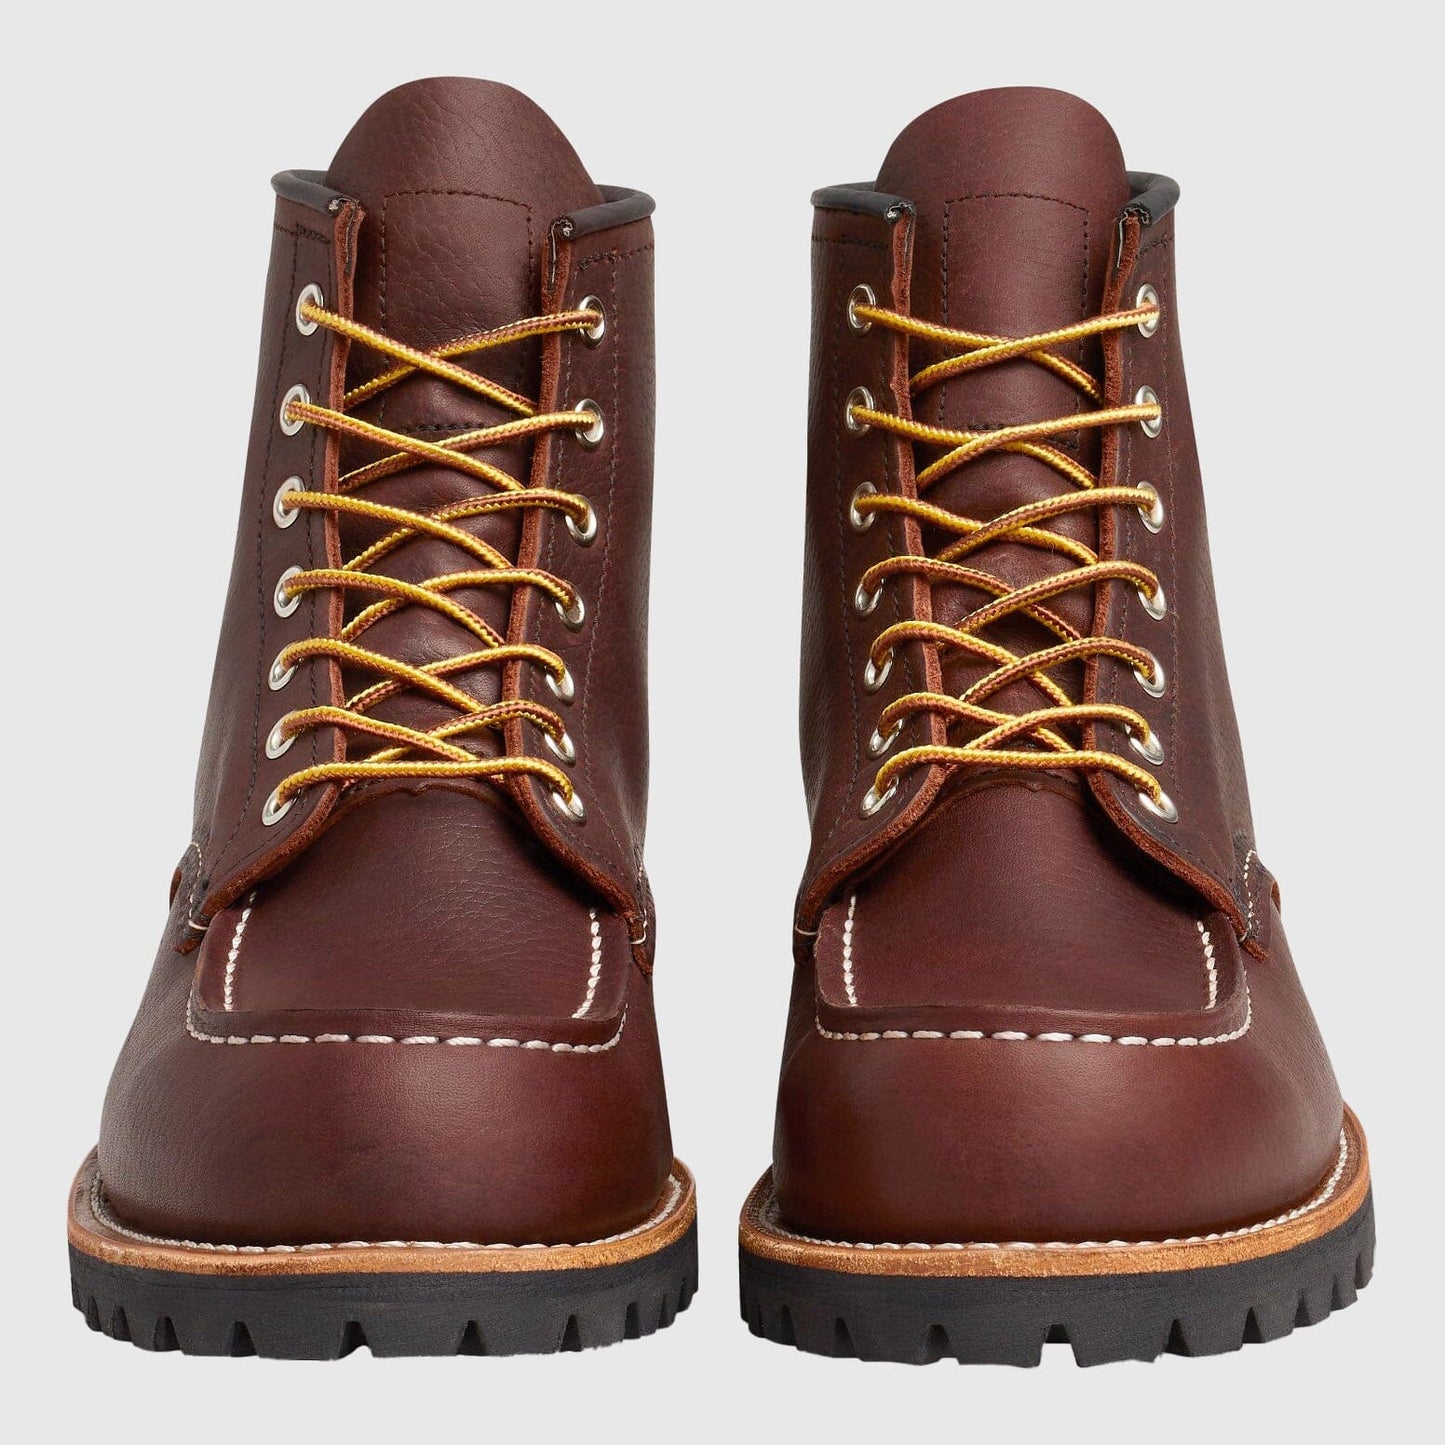 Red Wing Roughneck Moc Toe Boots - Briar Oil Slick Boots Red Wing 